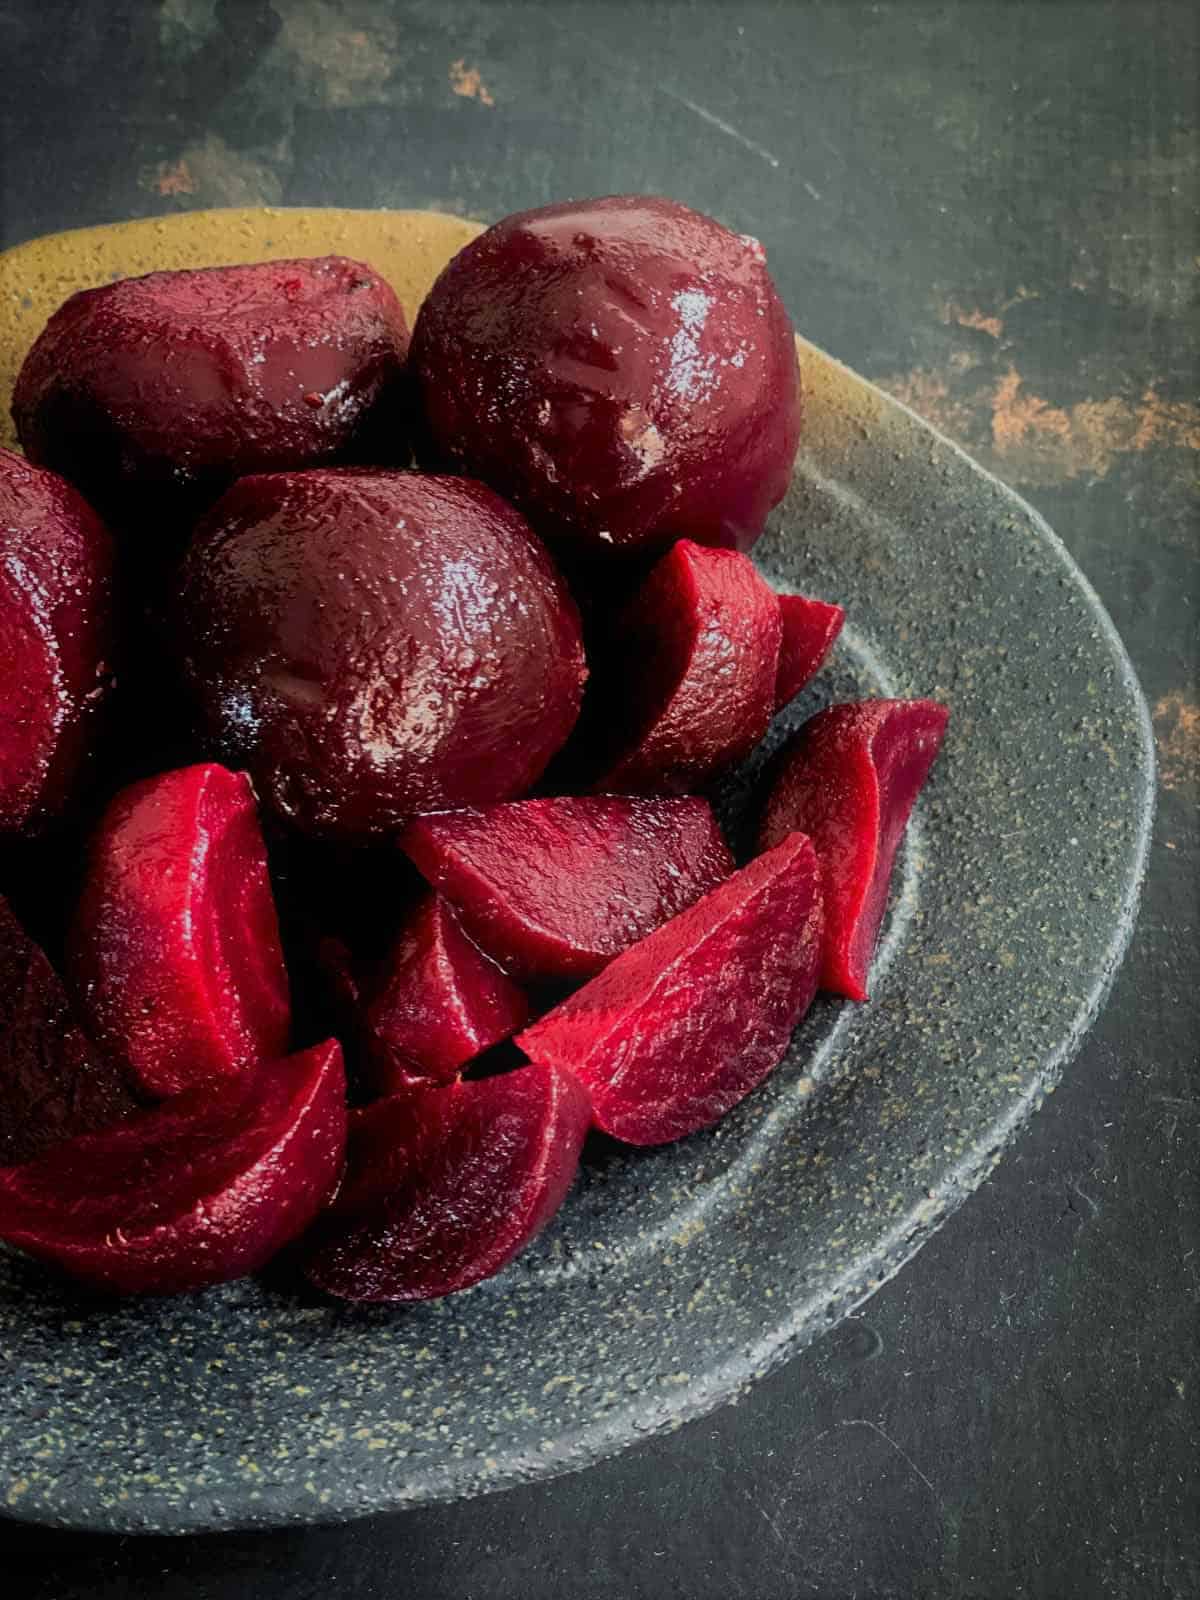 Baby beetroot. Whole and cut into wedges.